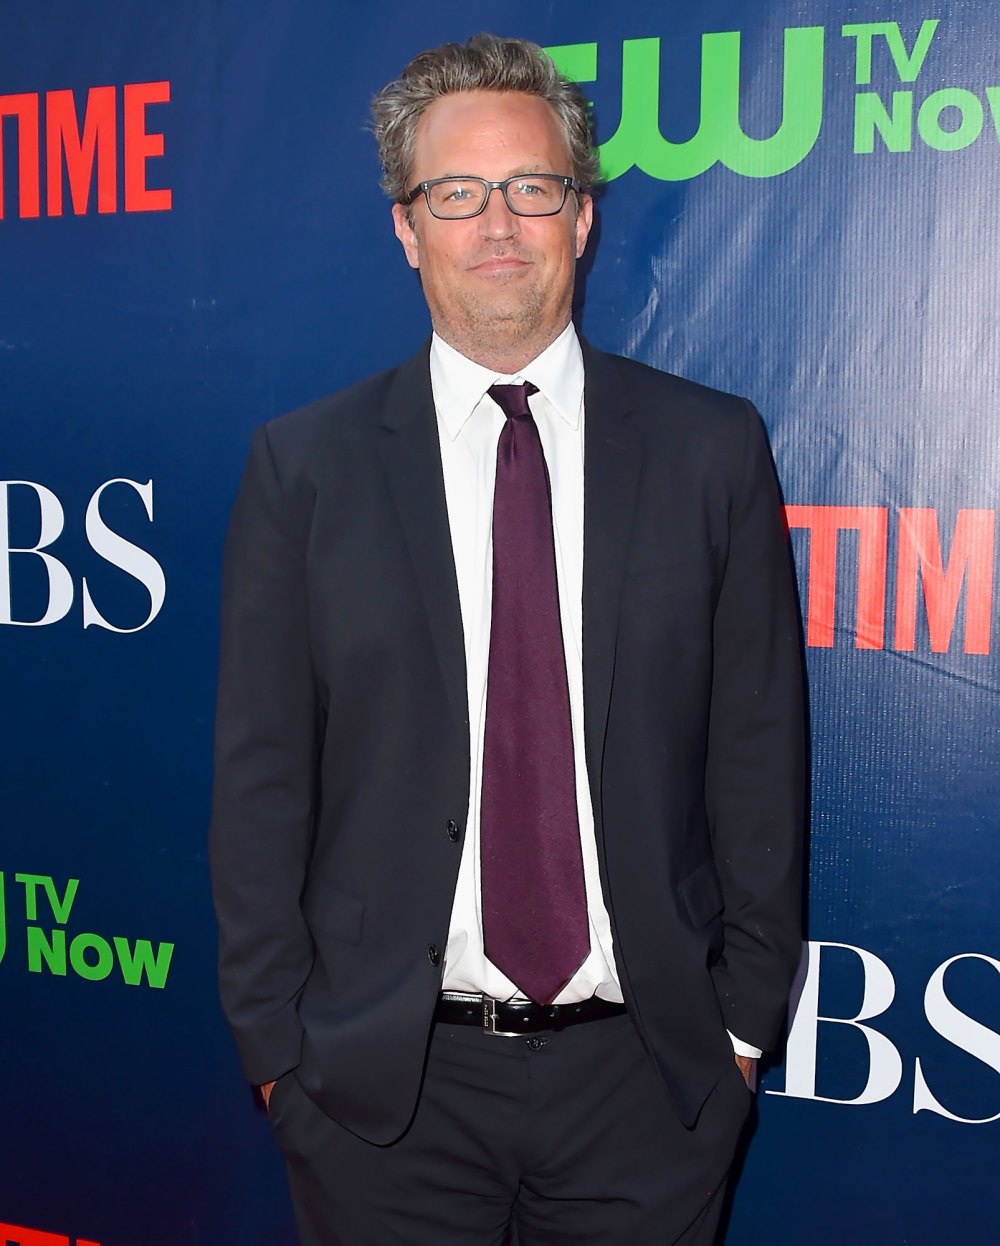 Matthew Perry Initial Autopsy Inconclusive Cause of Death Deferred